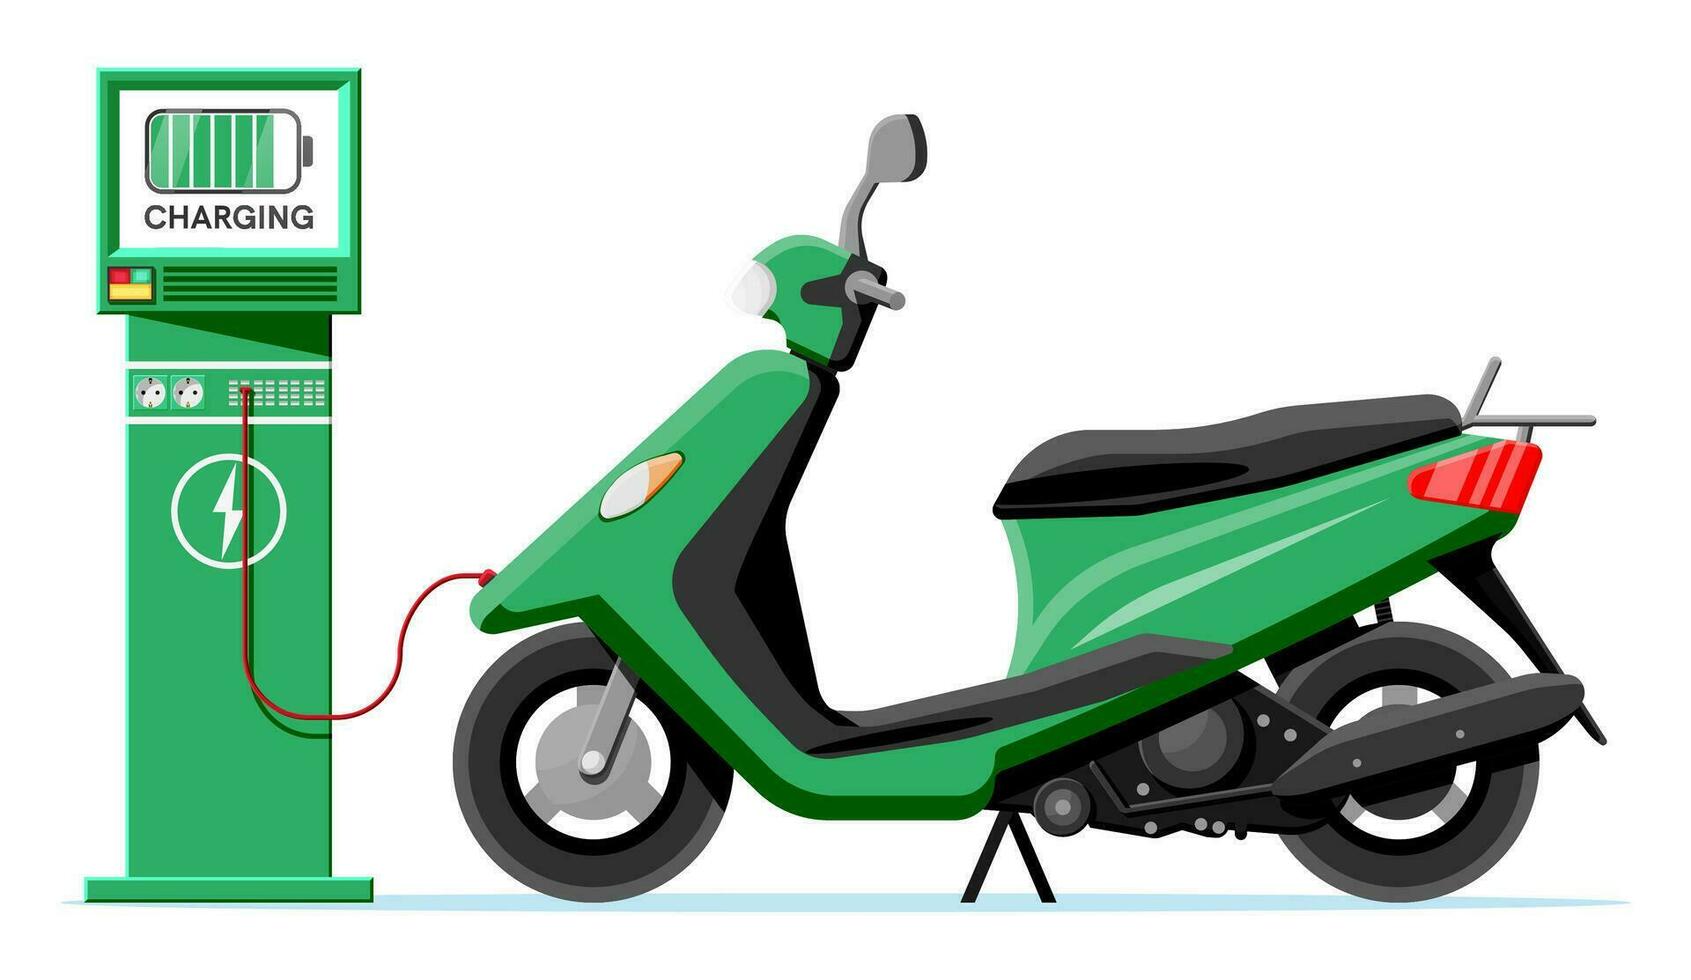 Electric Scooter and Charging Station Isolated. Green Modern Scooter Recharges Batteries. Motorbike and Charge Station with Screen. Eco City Transport Concept. Cartoon Flat Vector Illustration.